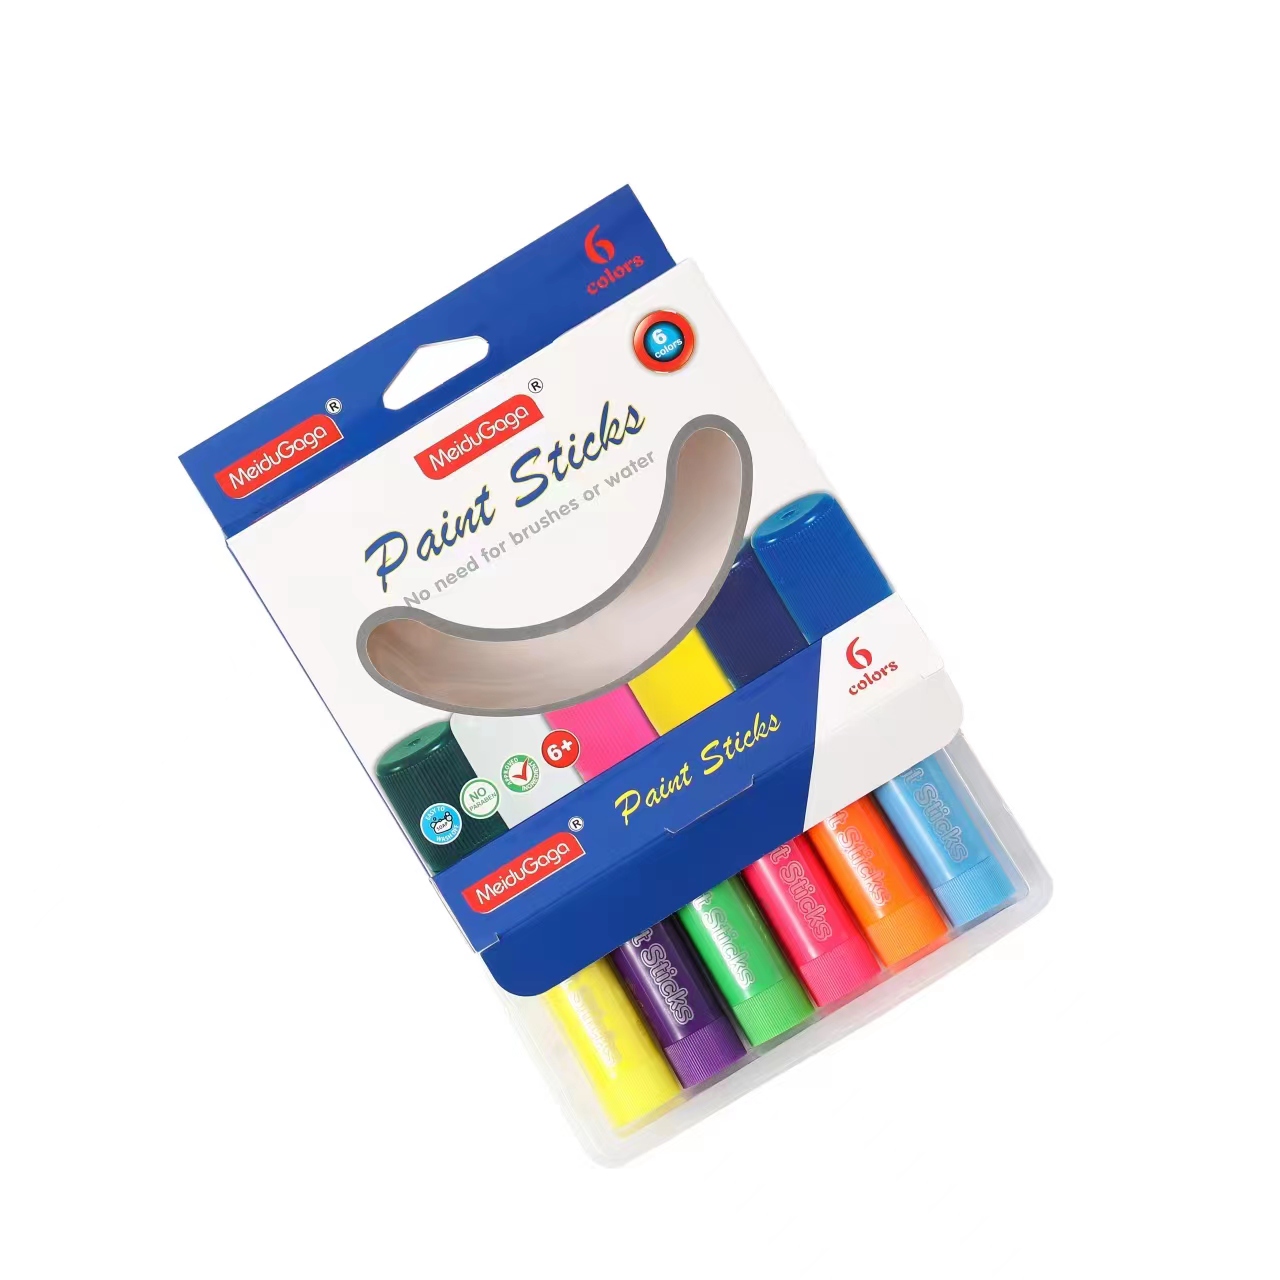 Tempera Paint Sticks, 30 Colors Solid Tempera Paint for Kids, Super Quick  Drying, Works Great on Paper Wood Glass Ceramic Canvas